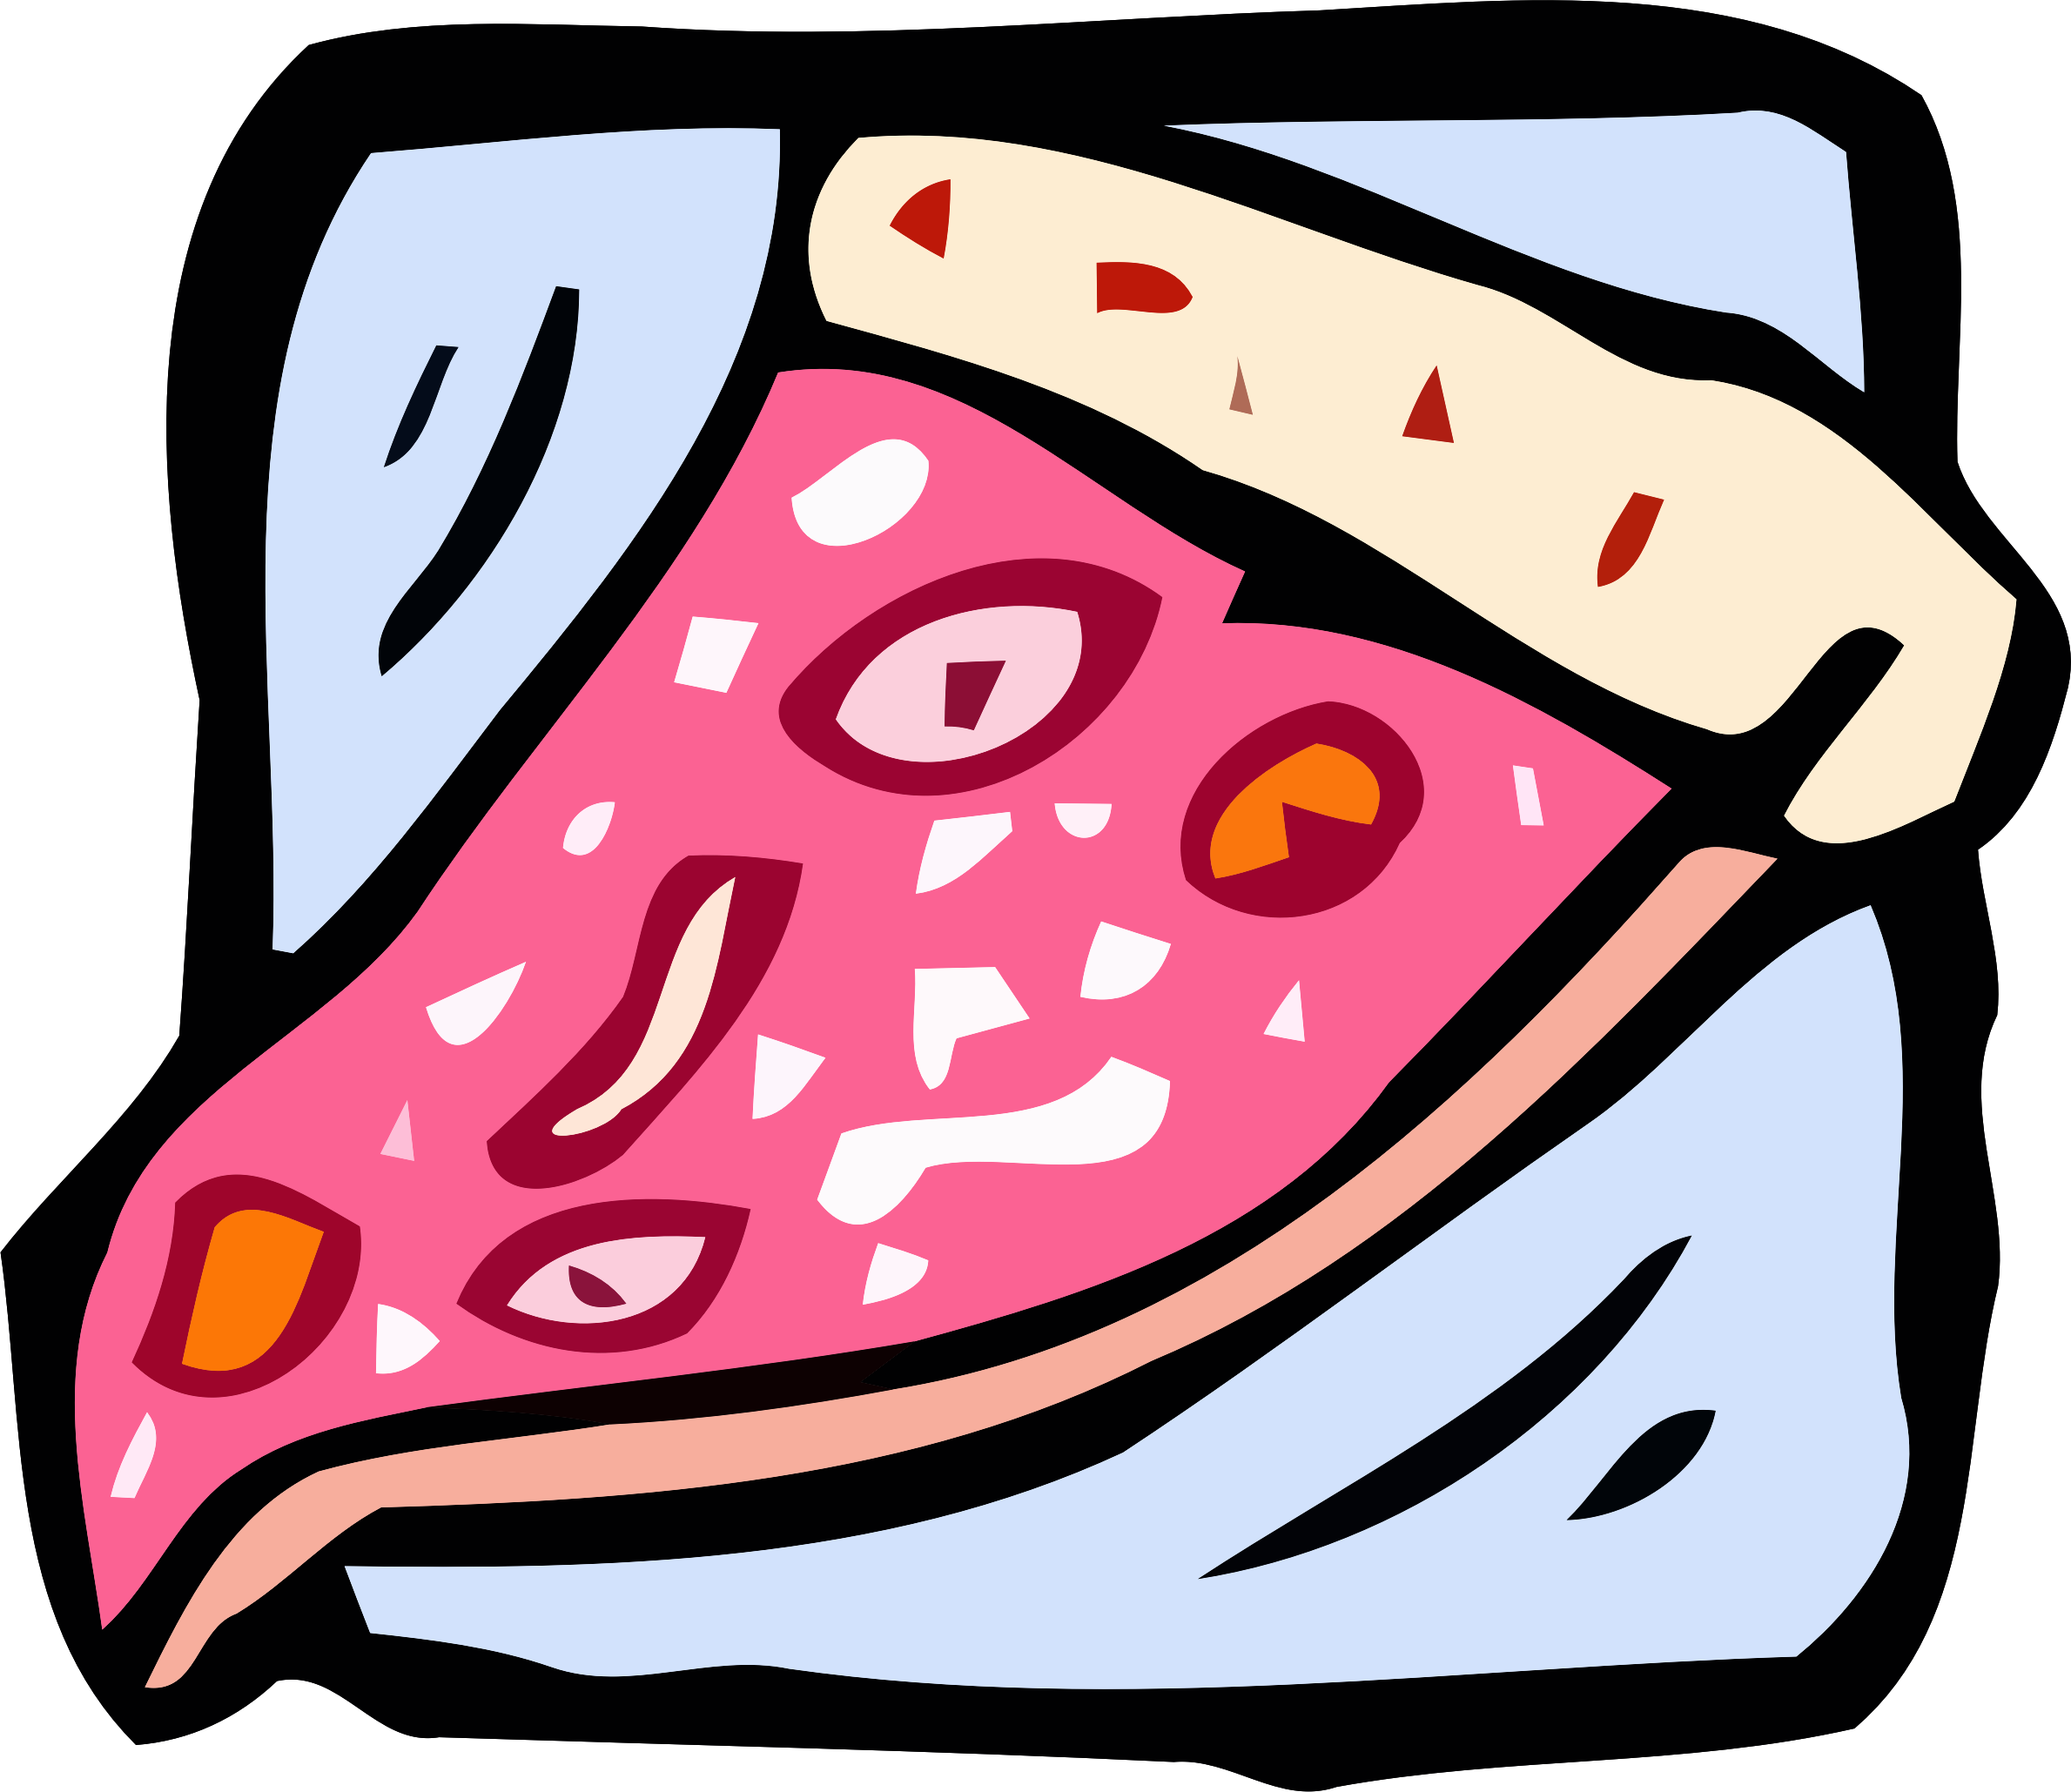 Food and drink icon. People clipart pizza